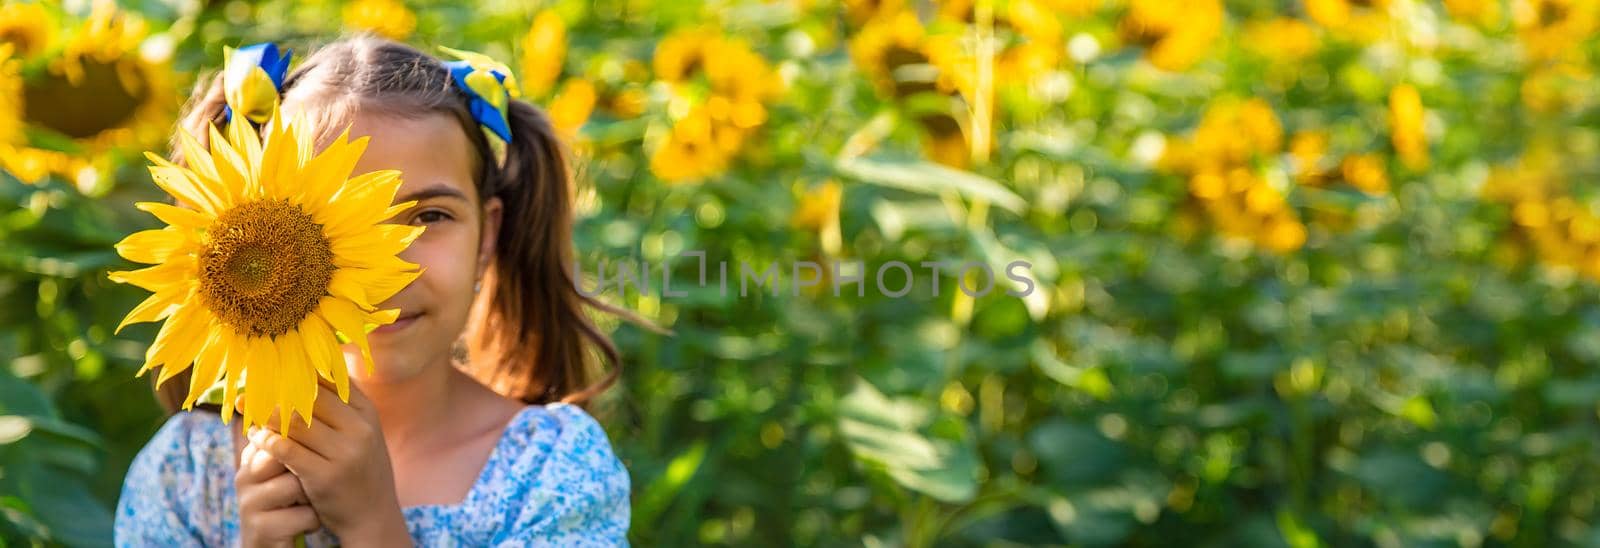 A child in a field of sunflowers. Ukraine. Selective focus. Nature.